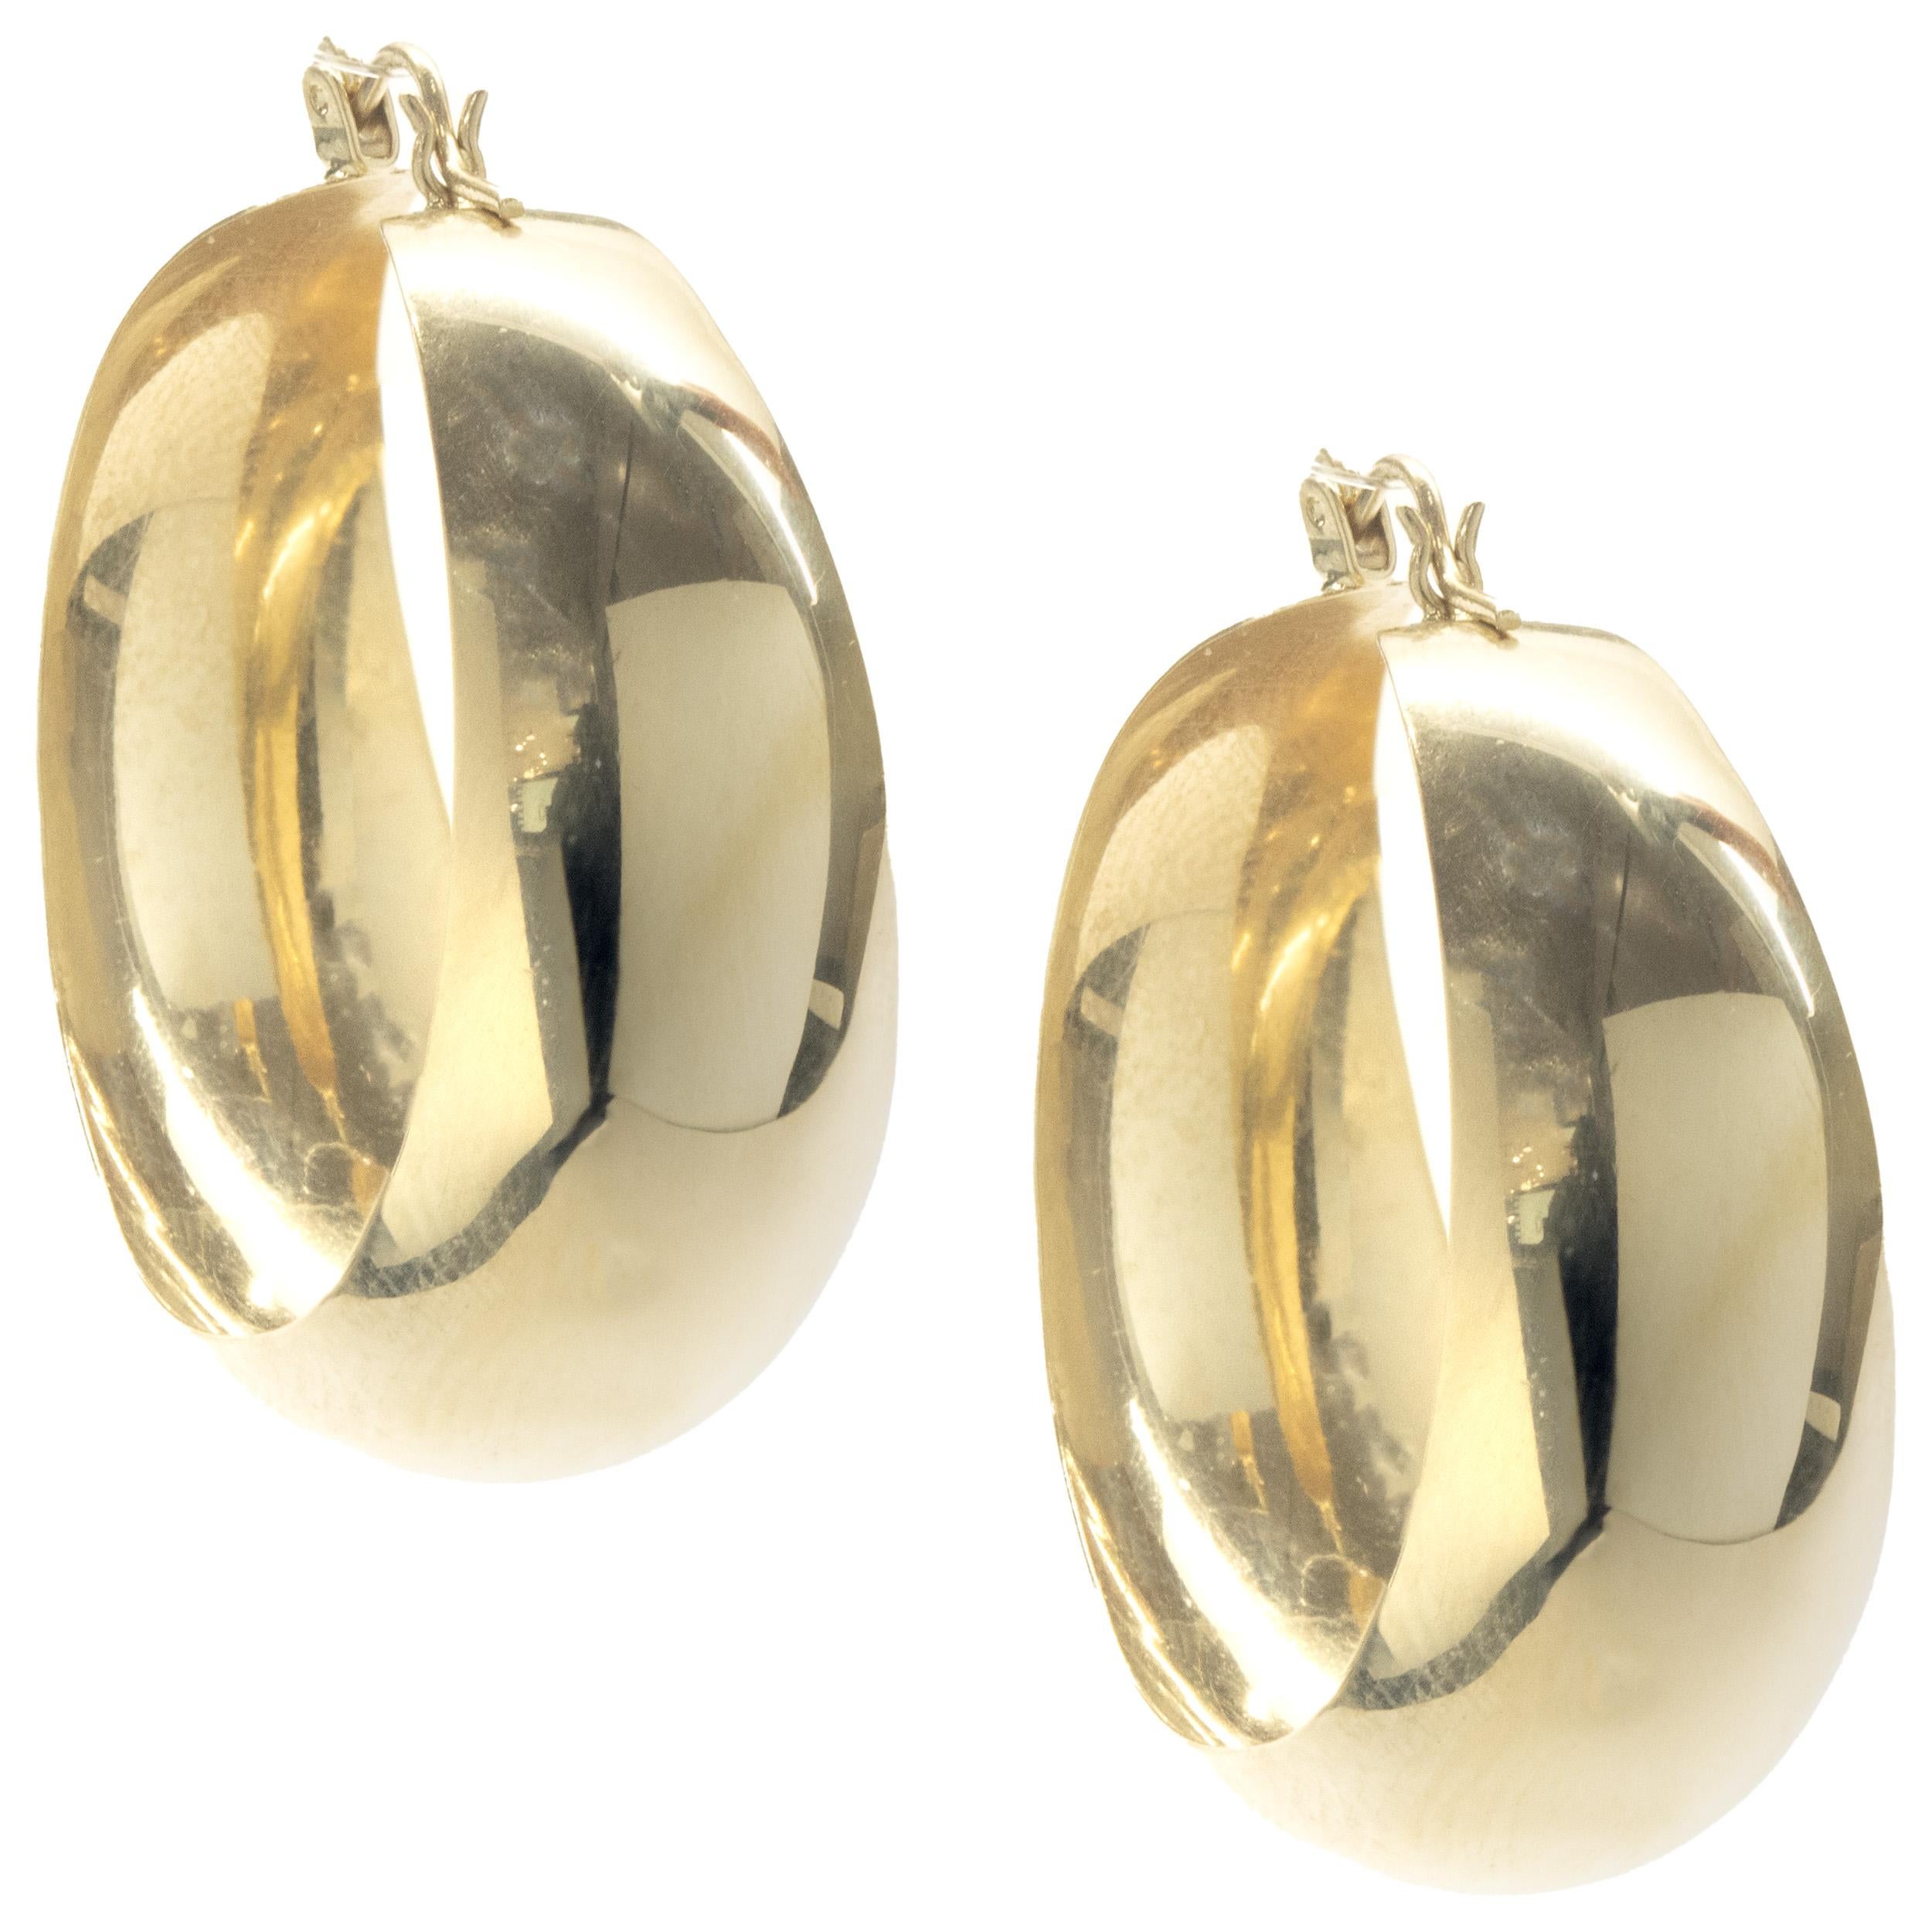 Material: 14K yellow gold
Dimensions: earrings measure 33 x 15mm 
Weight: 7.36 grams